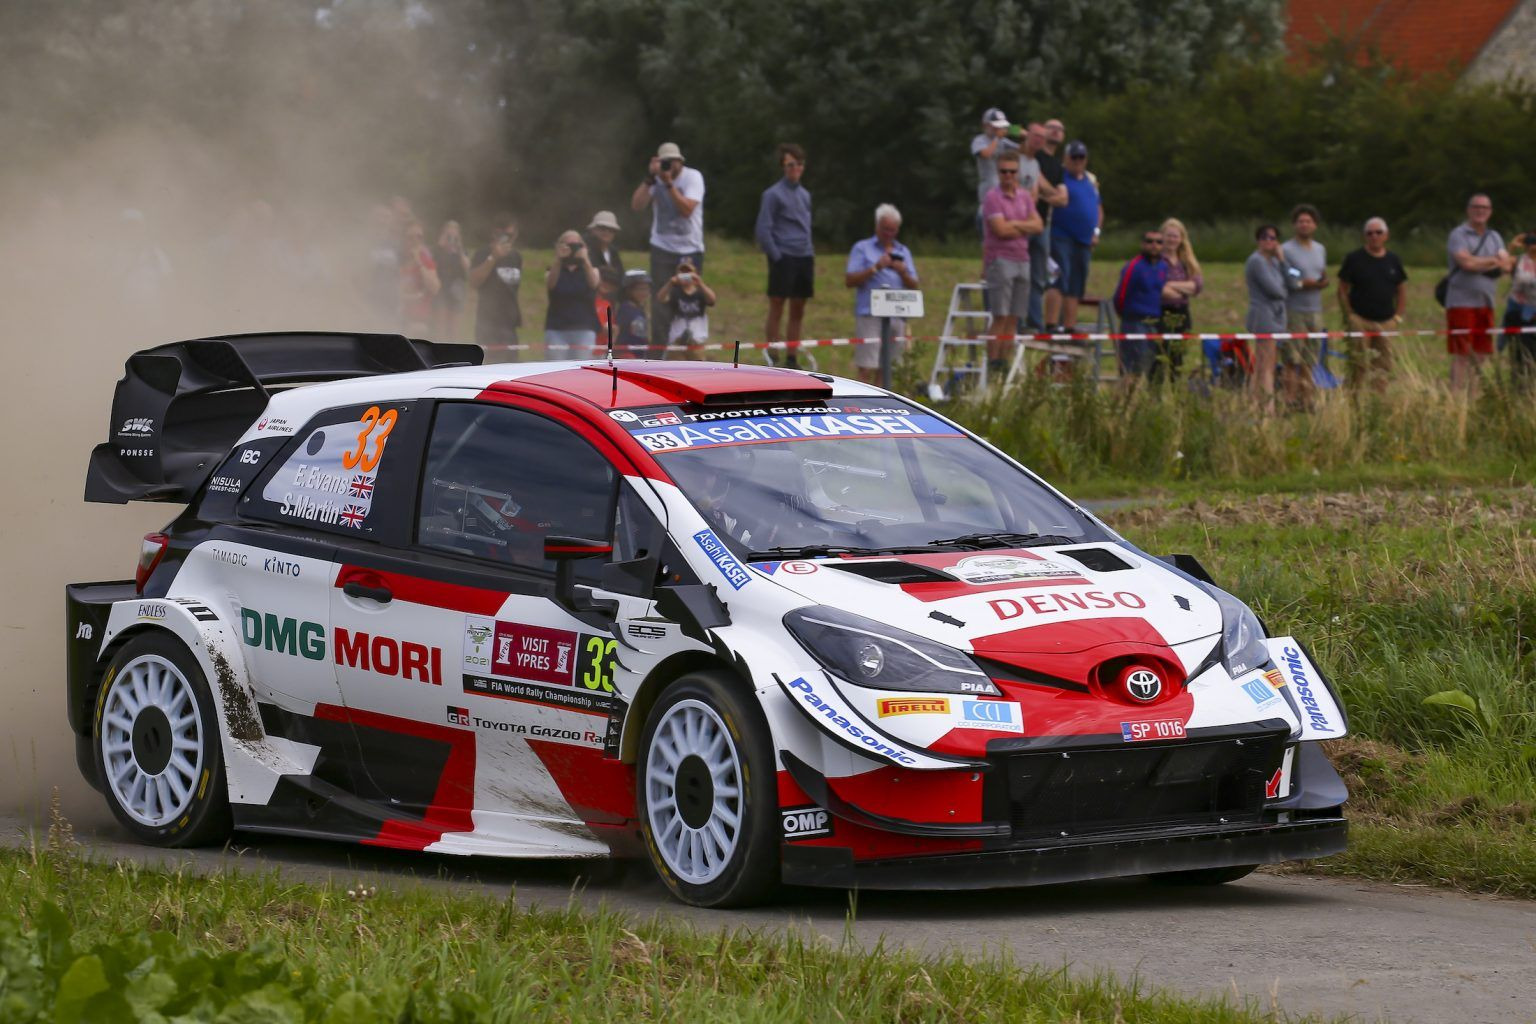 Fourth in Ypres Rally Belgium enough to keep Drivers Championship Challenge Alive